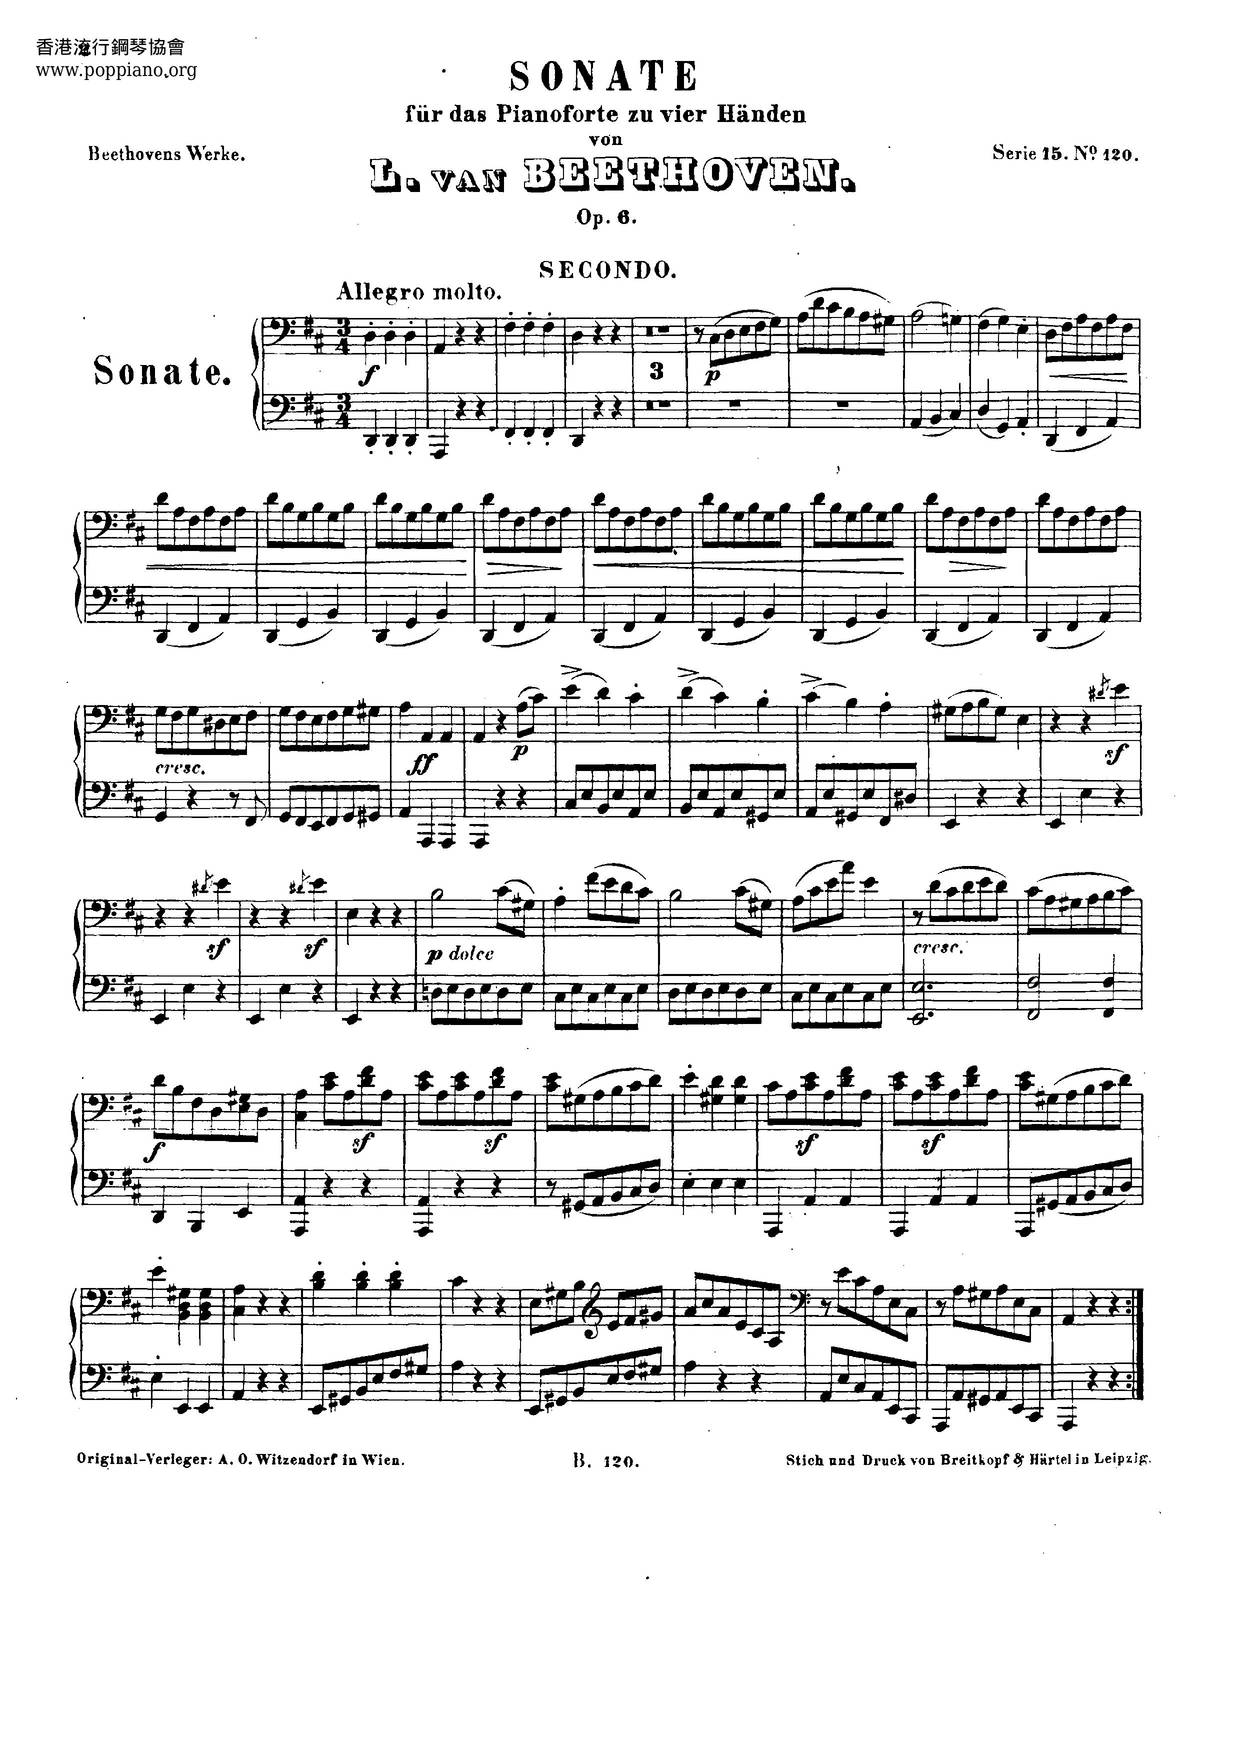 Sonata For Piano Four Hands In D Major, Op. 6琴譜